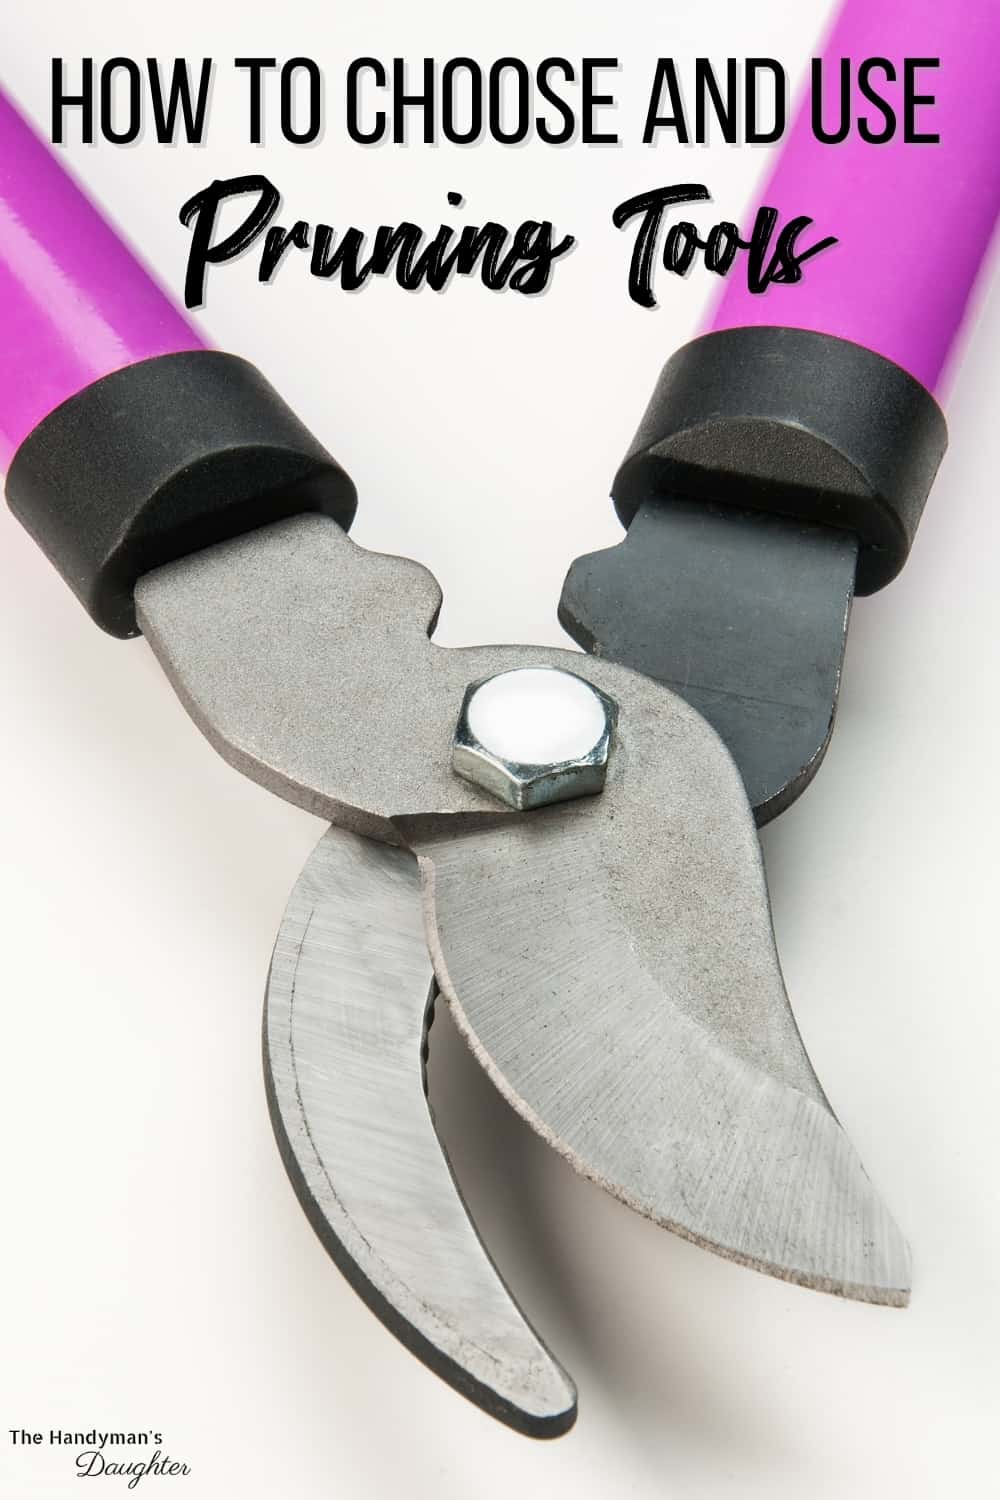 how to choose and use pruning tools